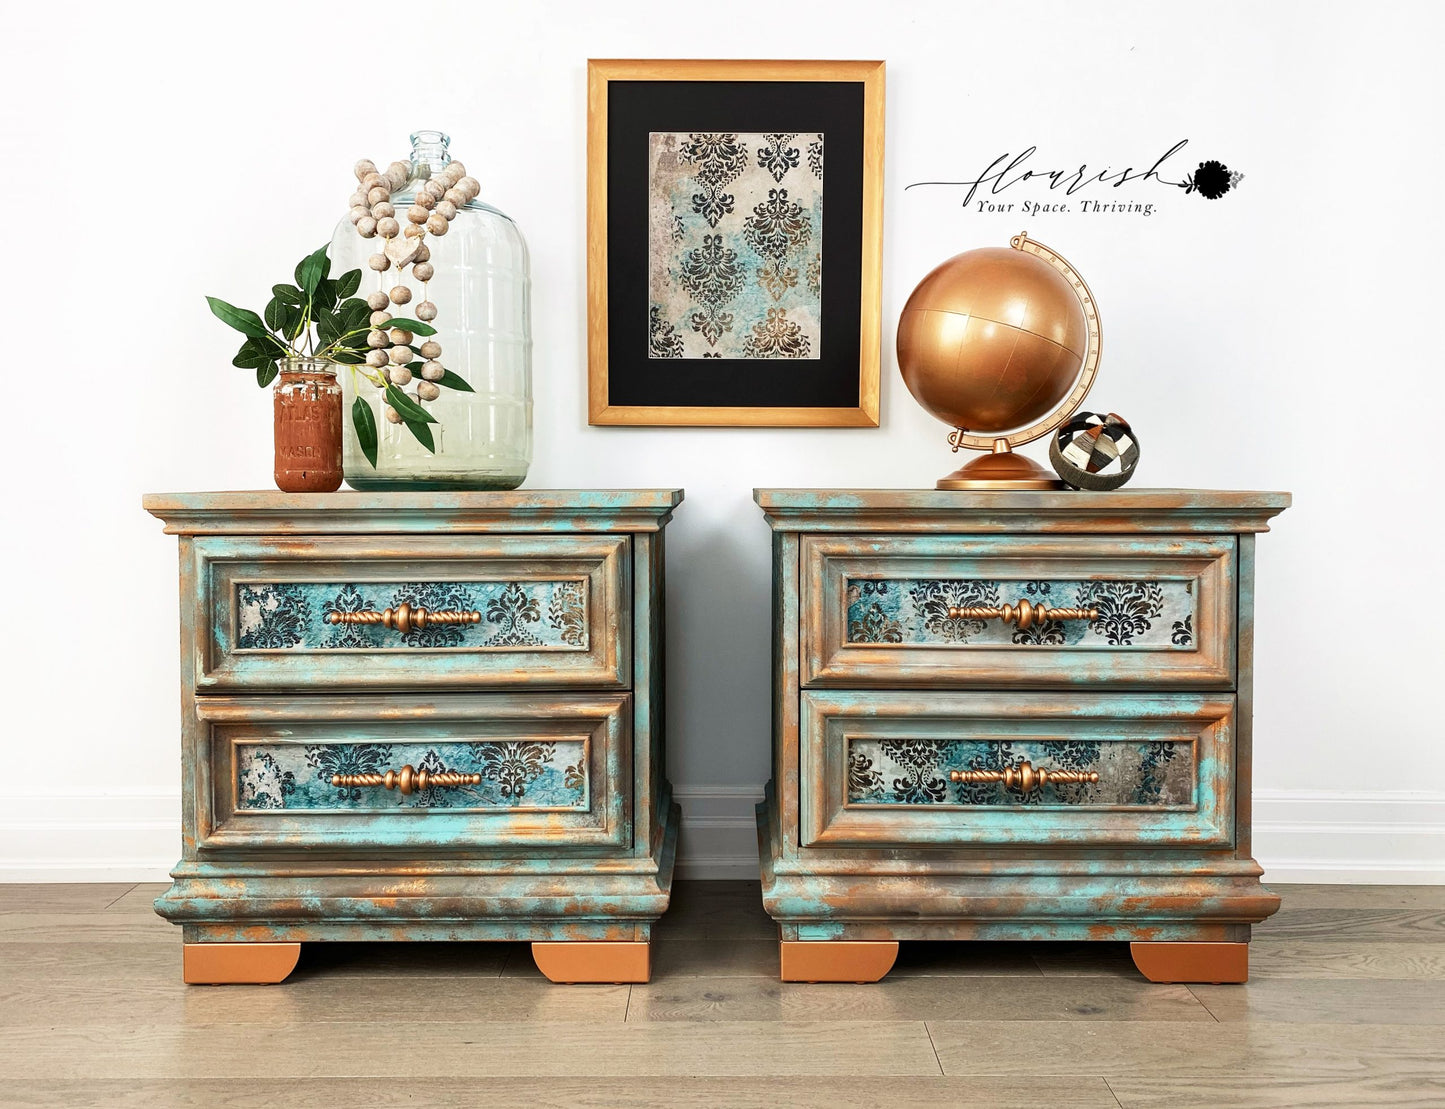 Patina flourish - Redesign découpage Redesign with Prima